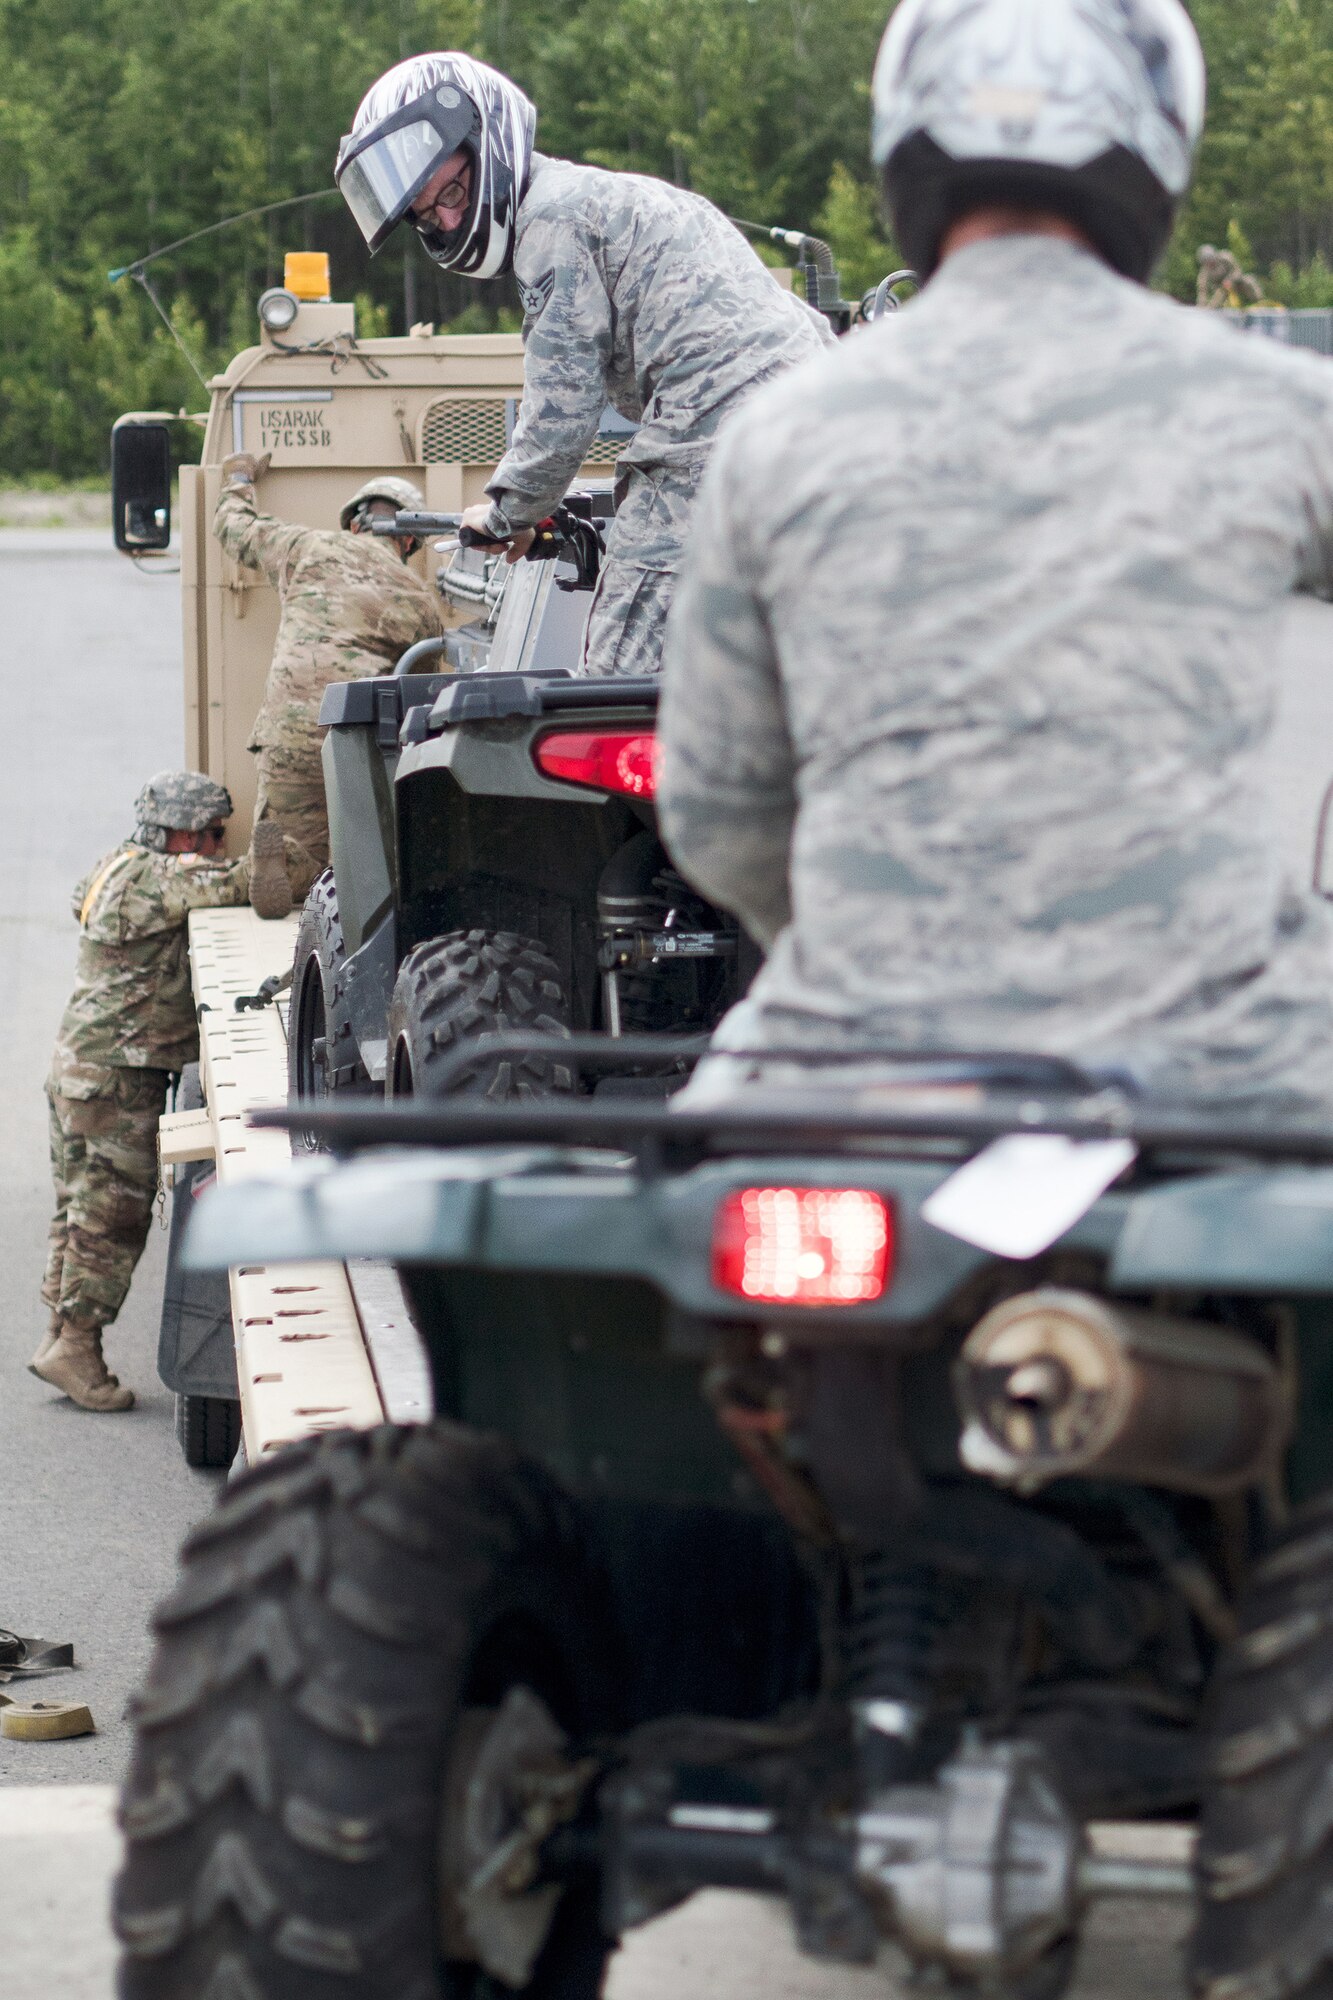 Senior Airman Adrian Durr, a native of Terre Haute, Ind., assigned to the 673rd Security Forces Squadron, watches his spacing after loading an all-terrain vehicle onto a flat bed trailer being secured by Soldiers assigned to the 109th Transportation Company "Muleskinners", 17th Combat Sustainment Support Battalion, U.S. Army Alaska, on Joint Base Elmendorf-Richardson, Alaska, June 28, 2017, in support of a U.S. Air Force exercise. USARAK is at the forefront  of protecting America’s interests in the Asia-Pacific region, and is one of the U.S. military’s most centrally located power projection platforms that benefits from joint training opportunities.